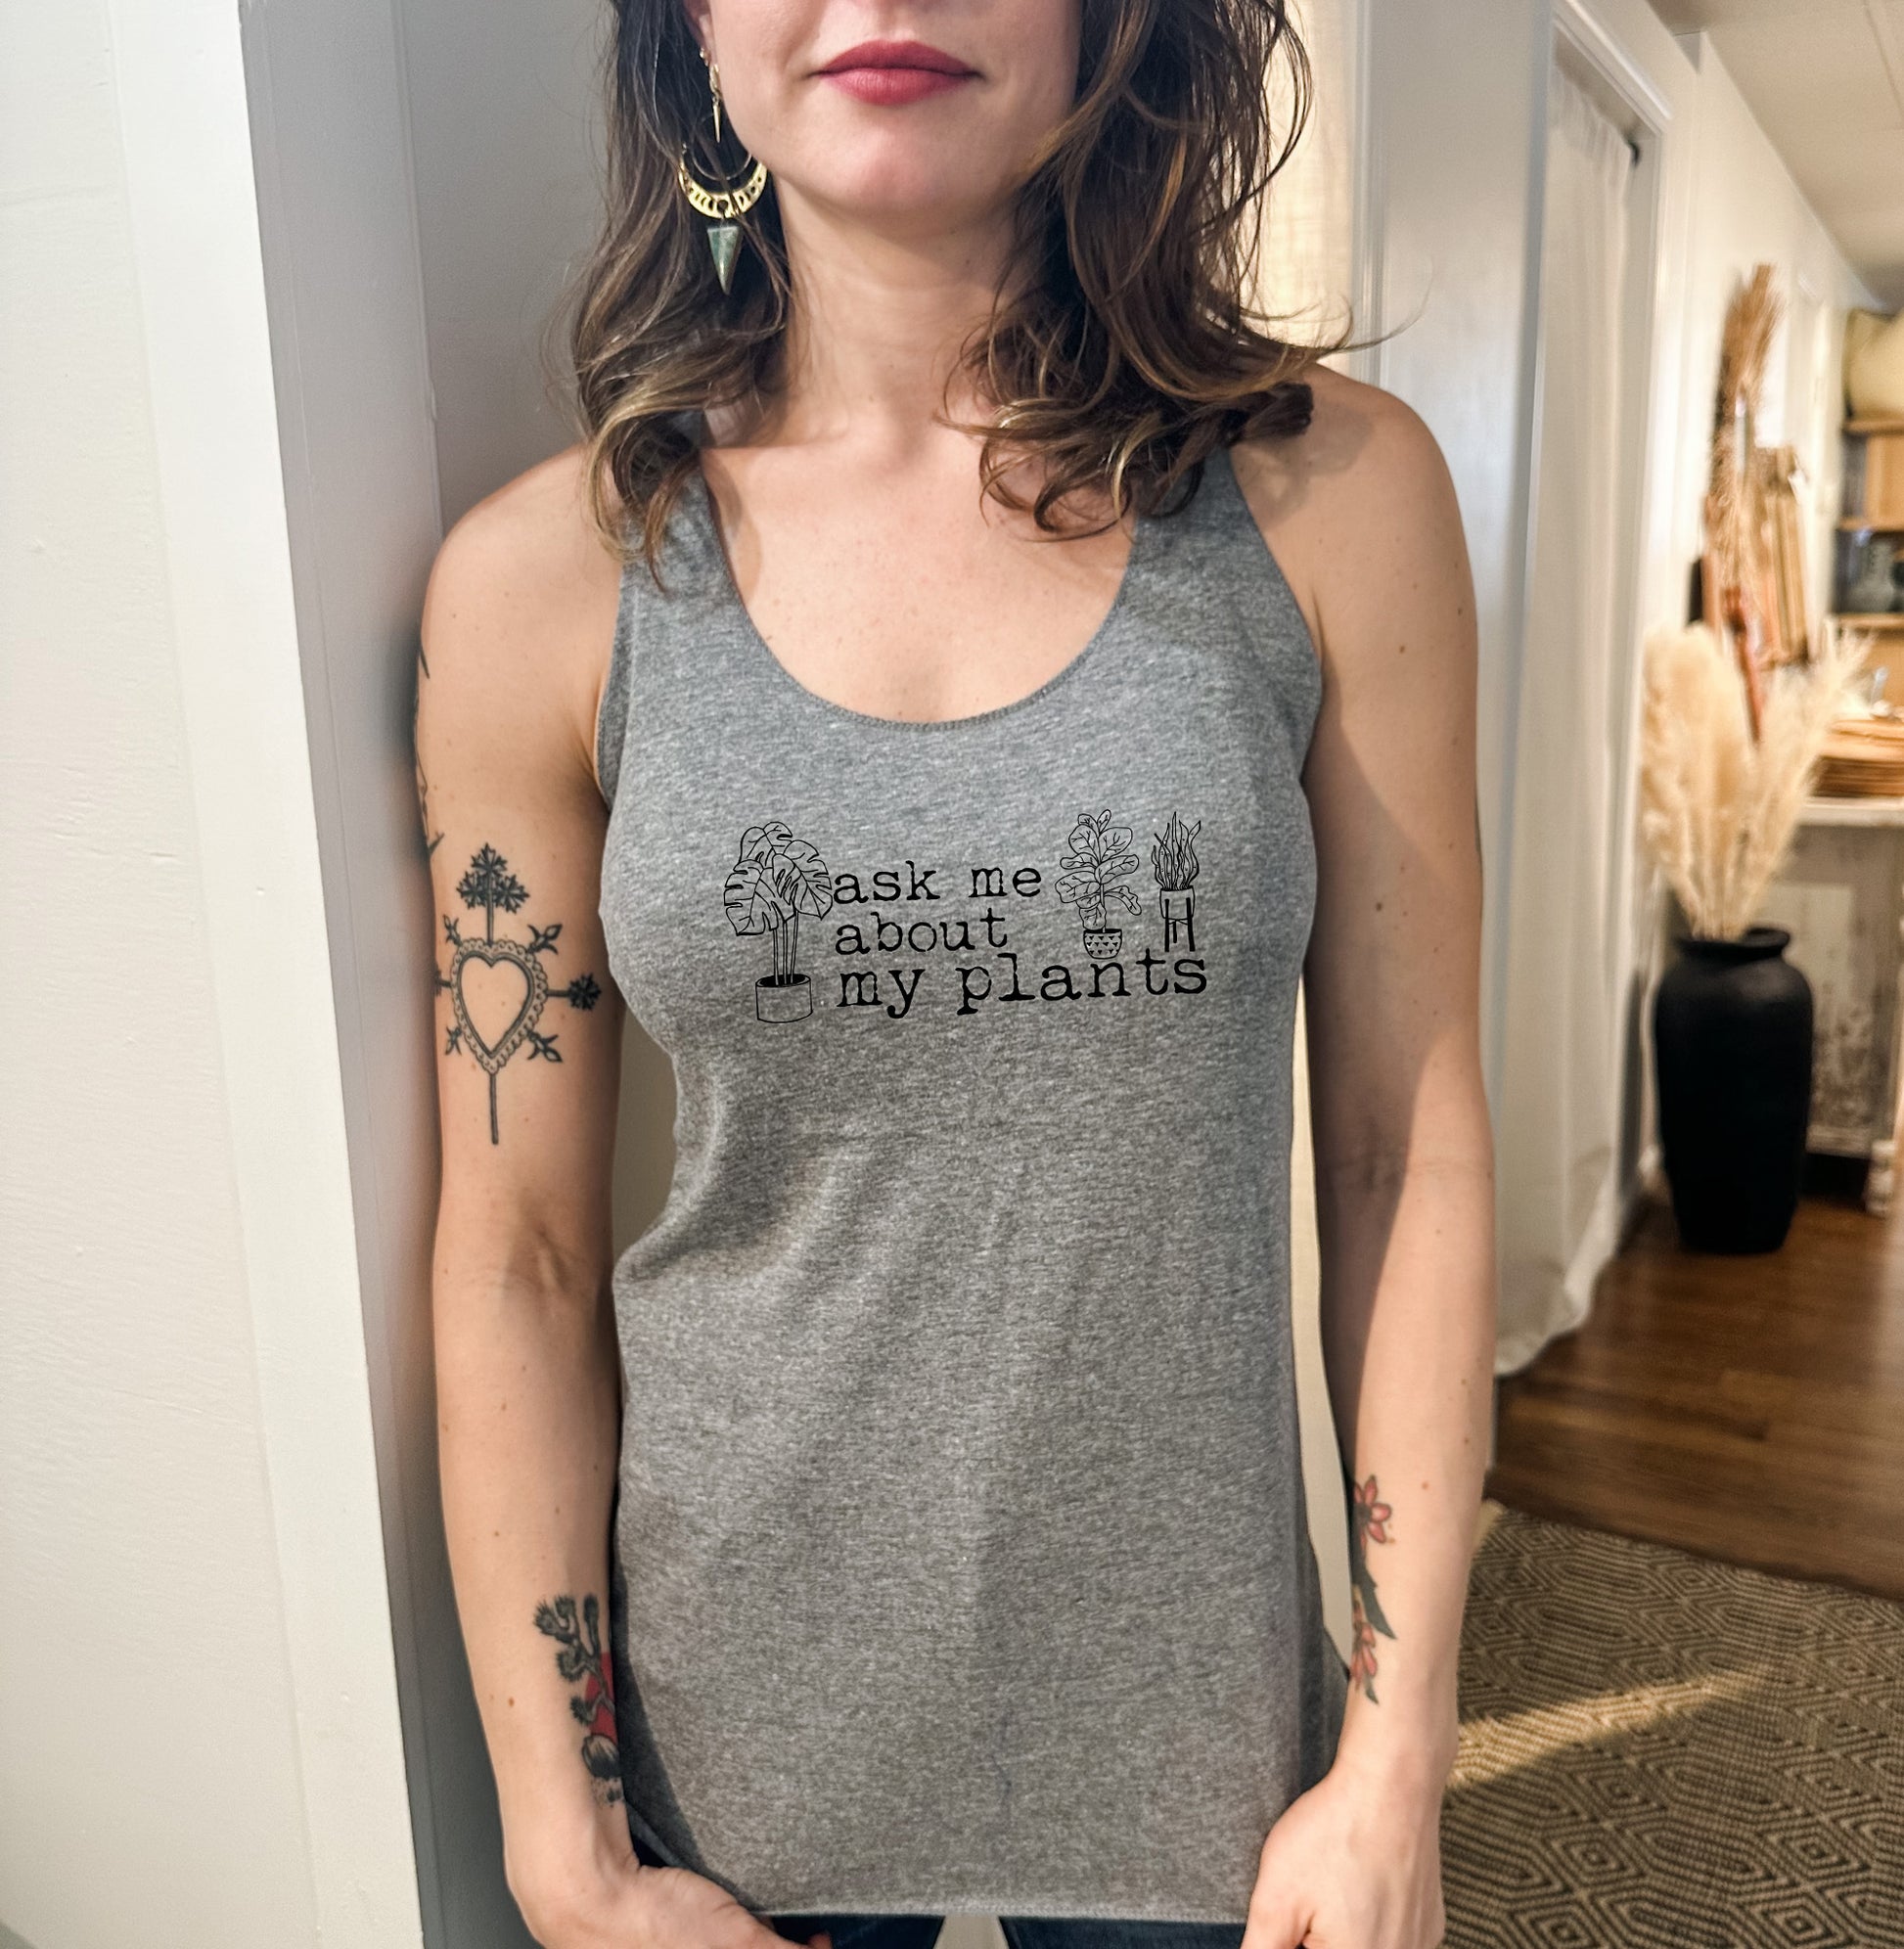 a woman wearing a tank top that says speak me about my pants